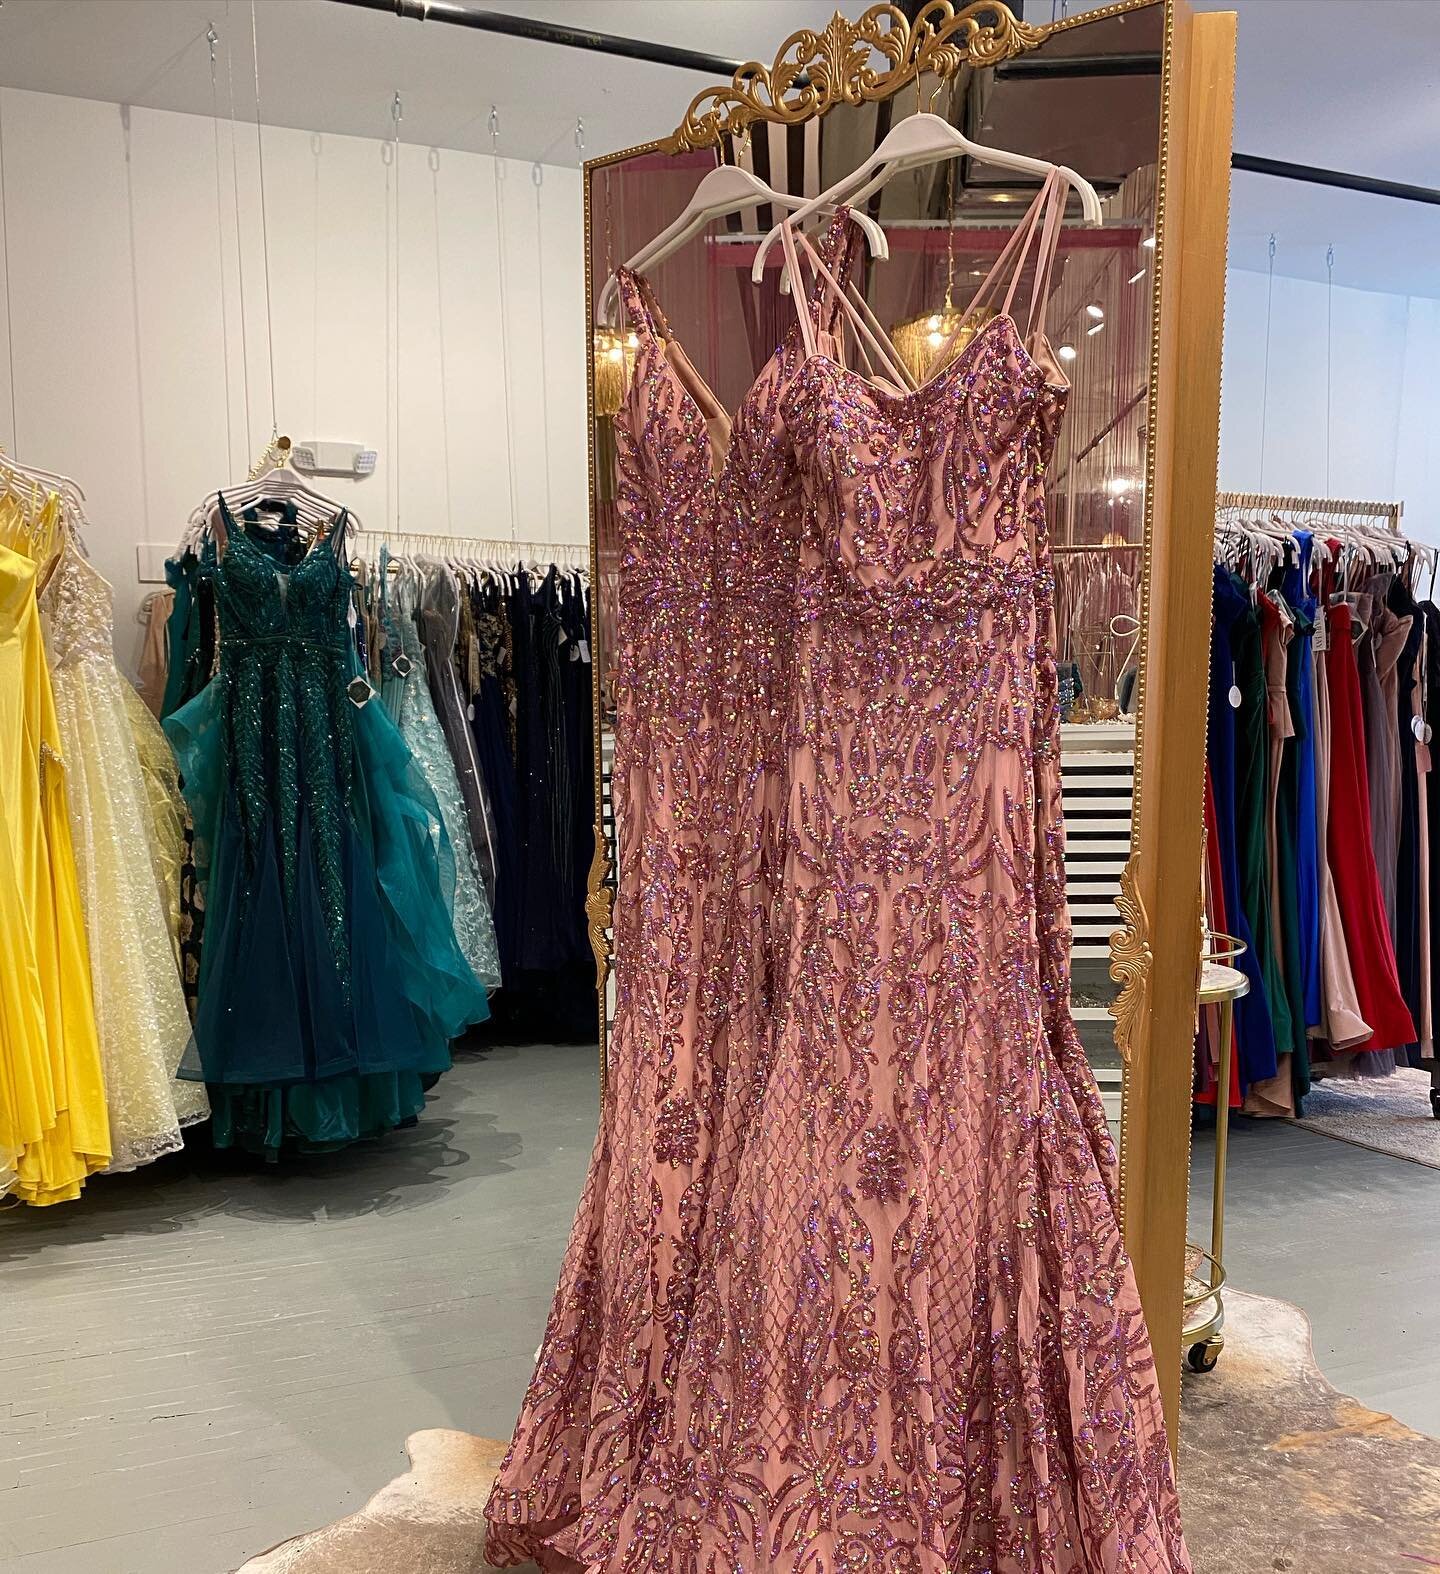 Sequin?!? YES PLEASE!!!💗💗💗 @ashleylauren 
.
.
.
.
#houseofkboutique #houseofk #dresses#gowns #prom #homecoming #gala #dress #style #fashion #sparkle #sequins #newalbany #indianaboutique #shoptlocal #wedding #bridal #bridalboutique #sequingown #dre